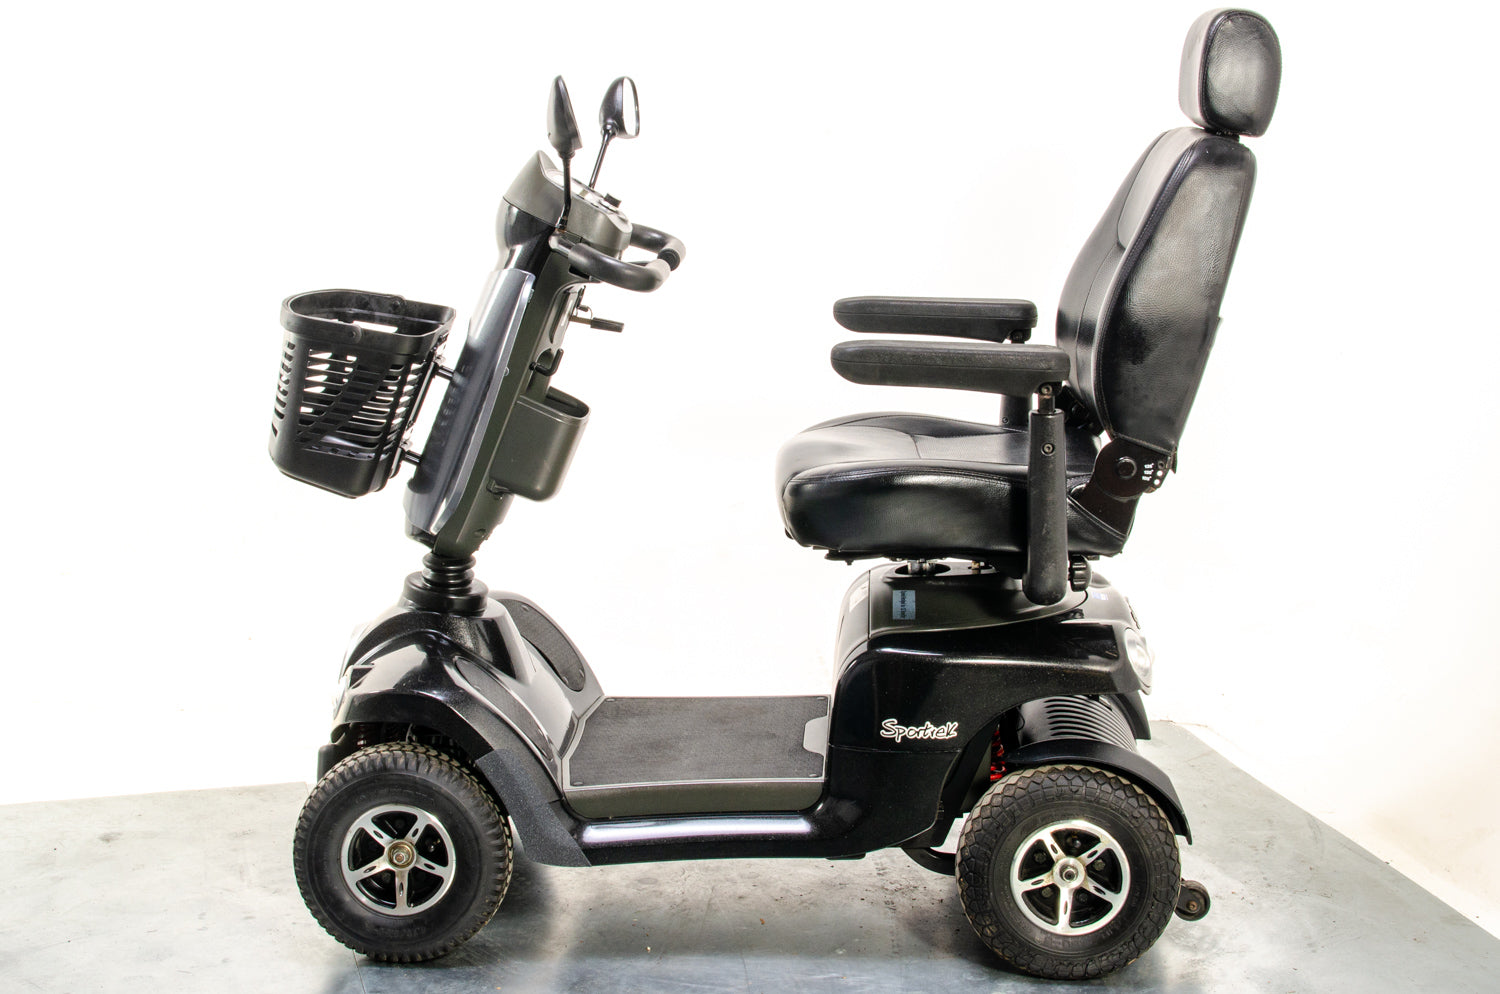 Excel Sportrek Used Mobility Scooter 8mph Road Pneumatic Van Os Grey Tyres Midsize Pavement